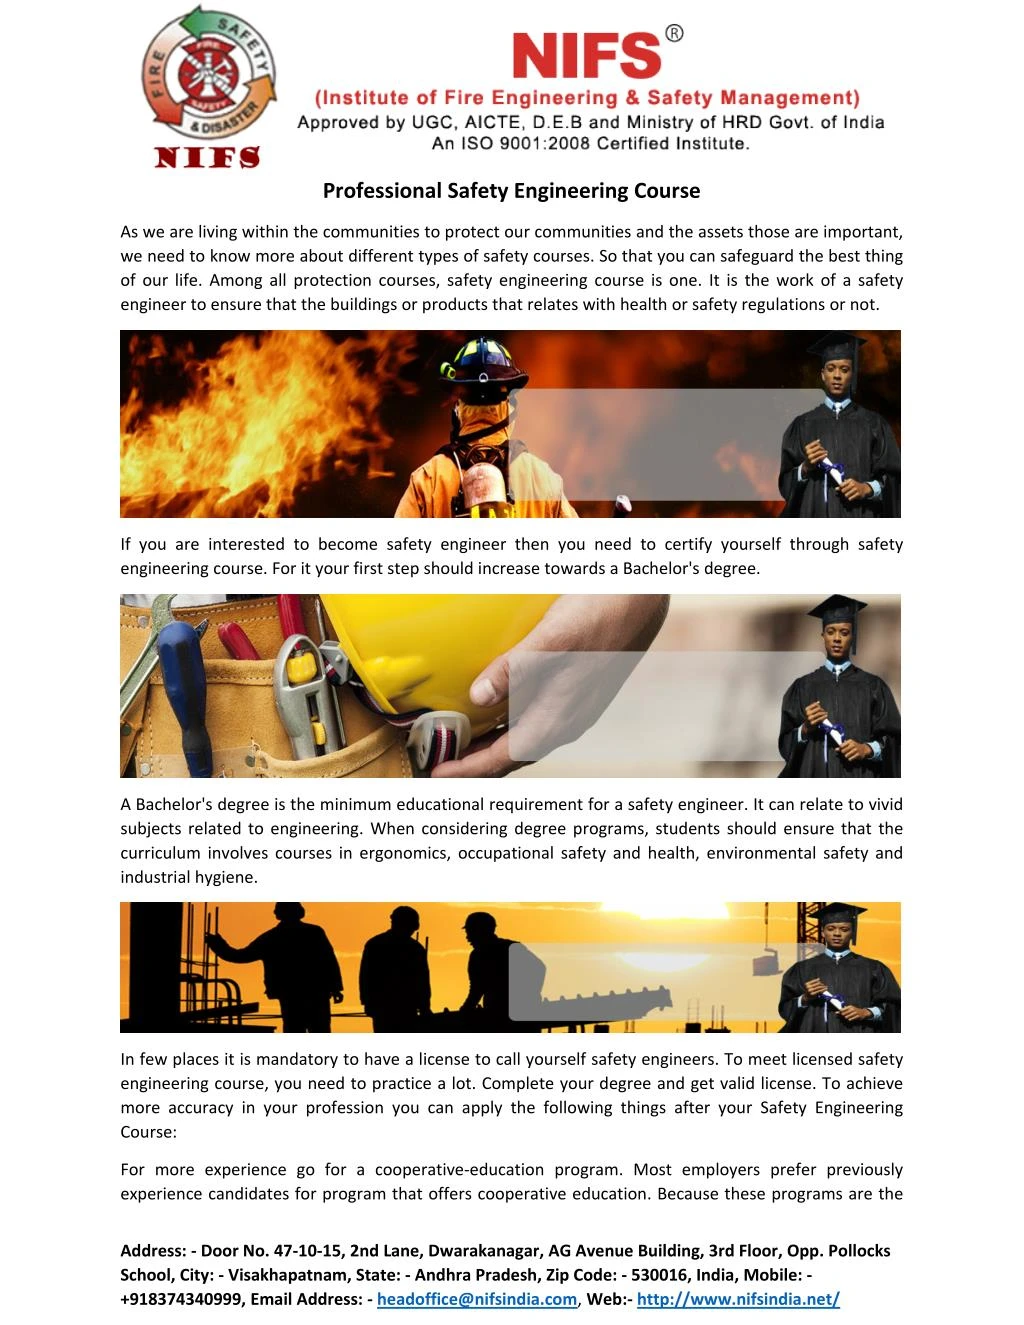 PPT - Professional Safety Engineering Course PowerPoint Presentation ...